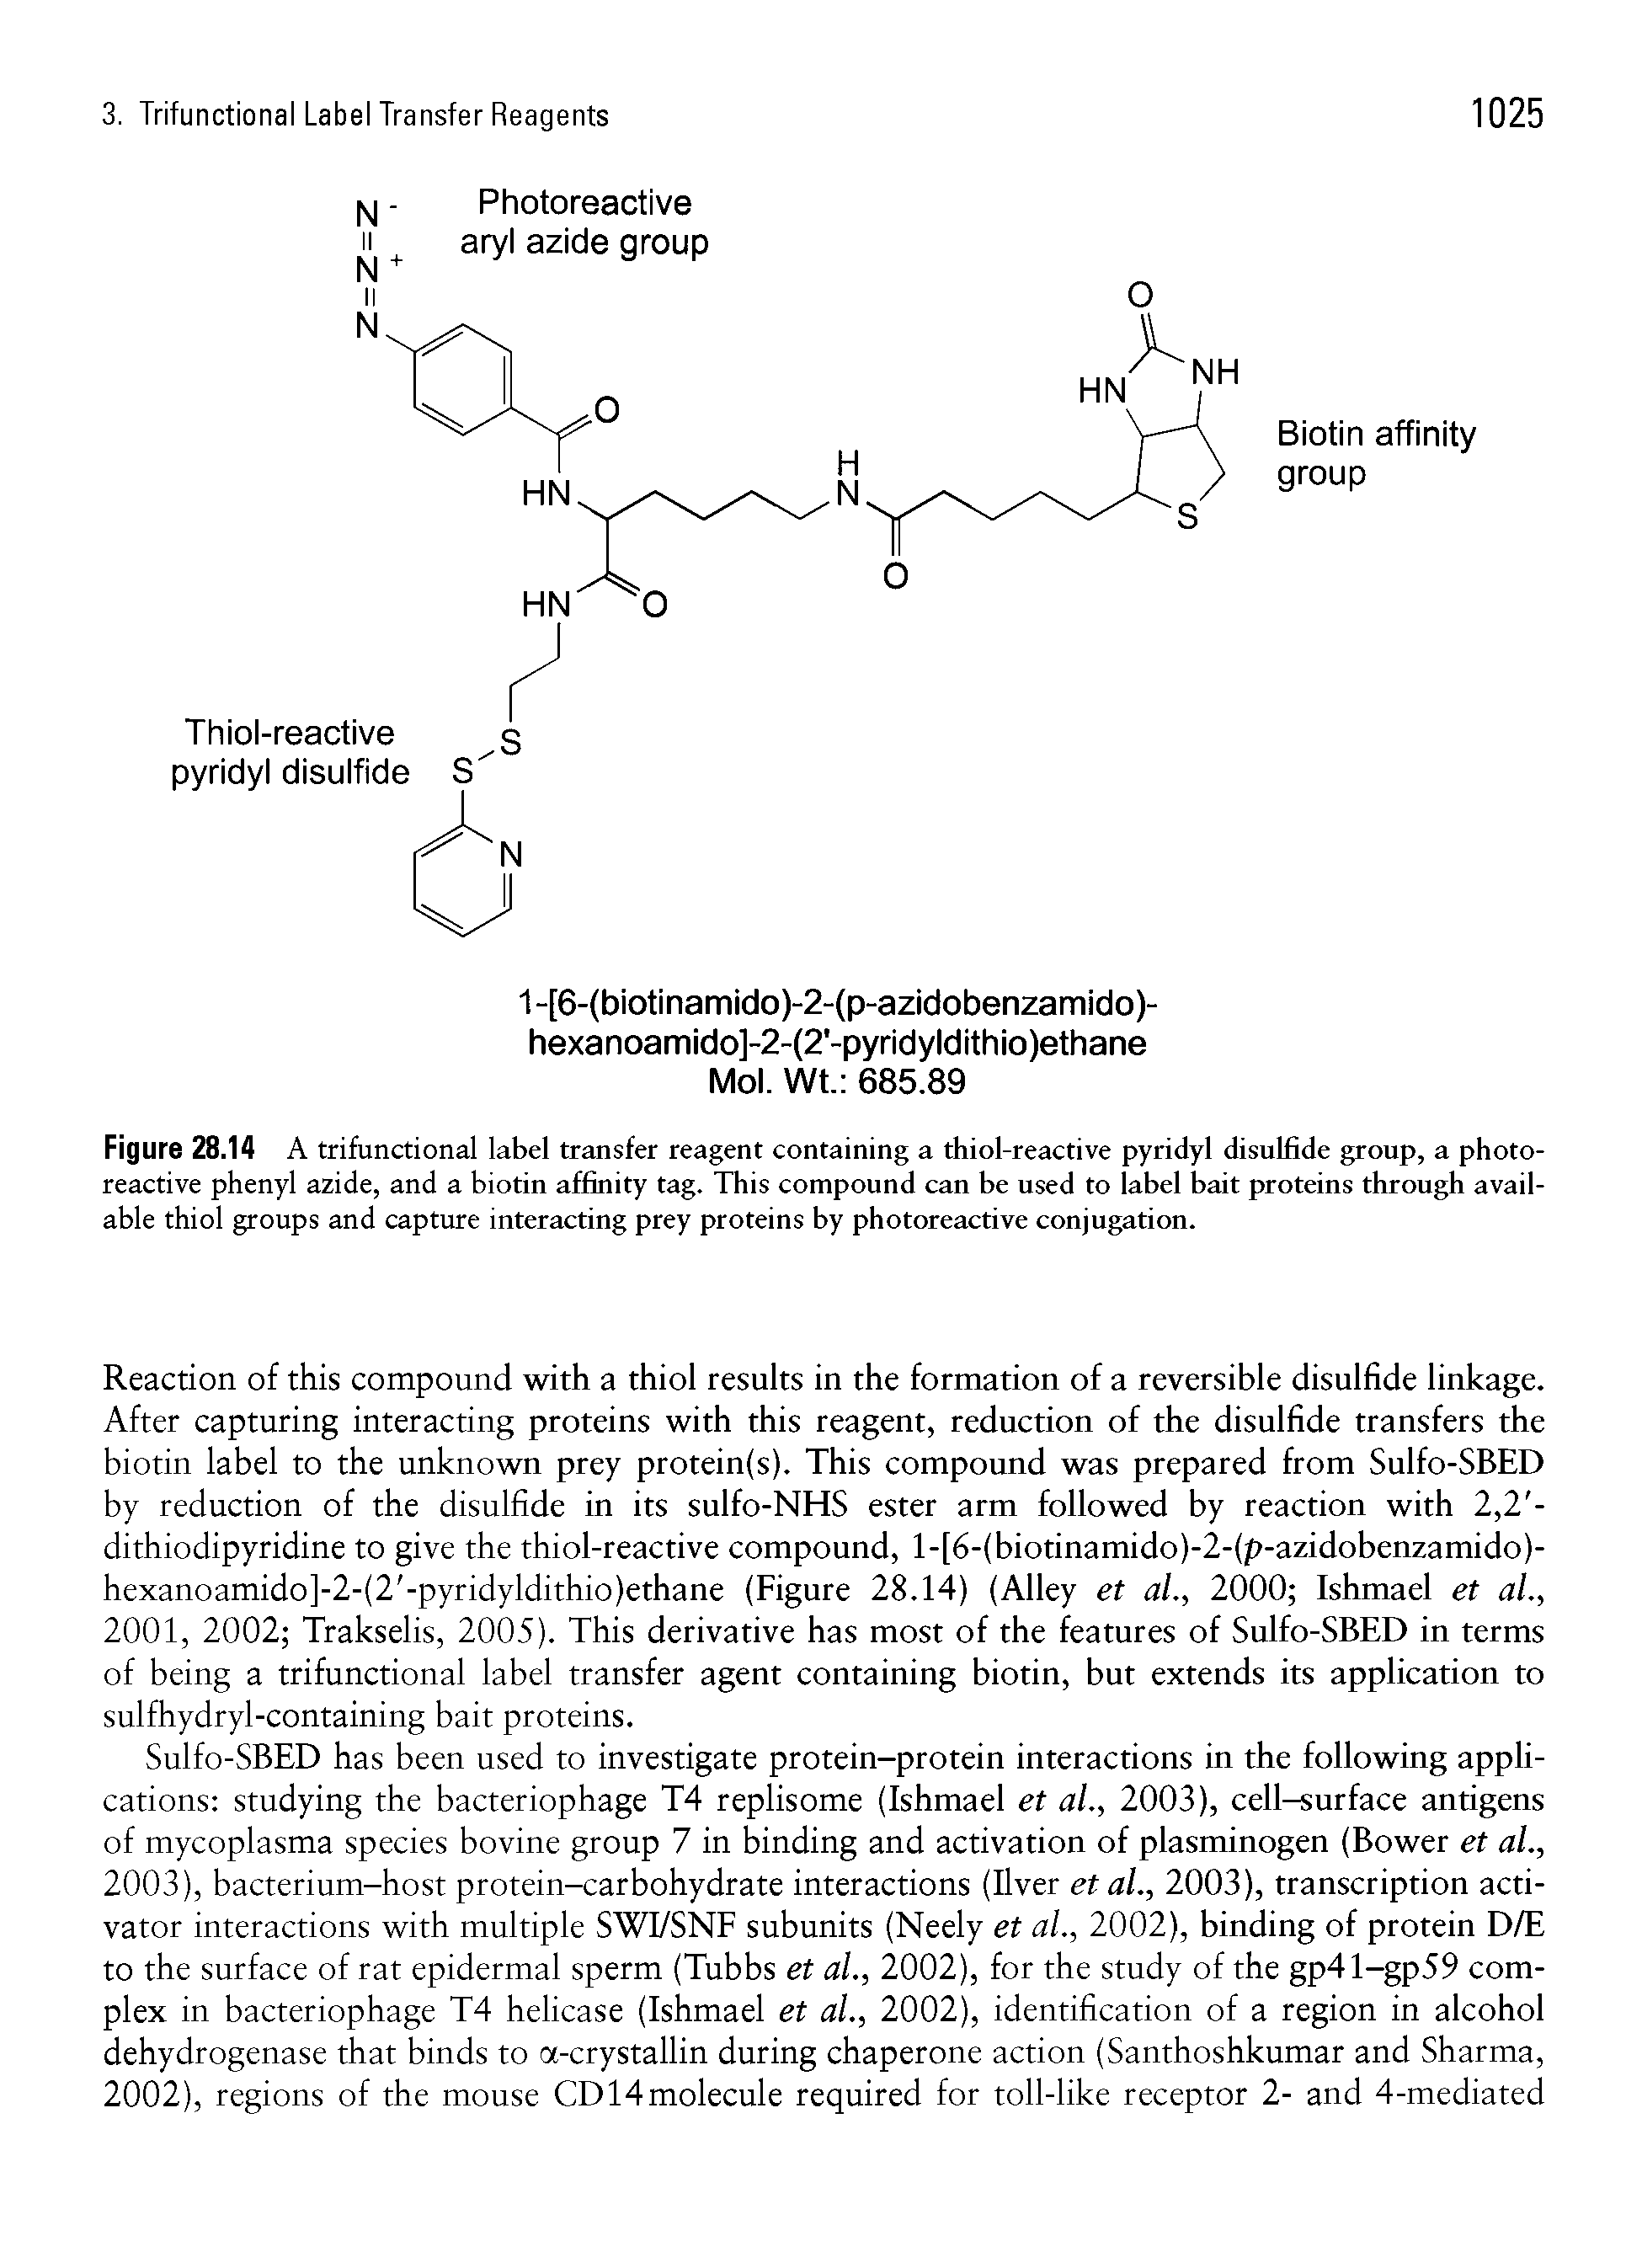 Figure 28.14 A trifunctional label transfer reagent containing a thiol-reactive pyridyl disulfide group, a photo-reactive phenyl azide, and a biotin affinity tag. This compound can be used to label bait proteins through available thiol groups and capture interacting prey proteins by photoreactive conjugation.